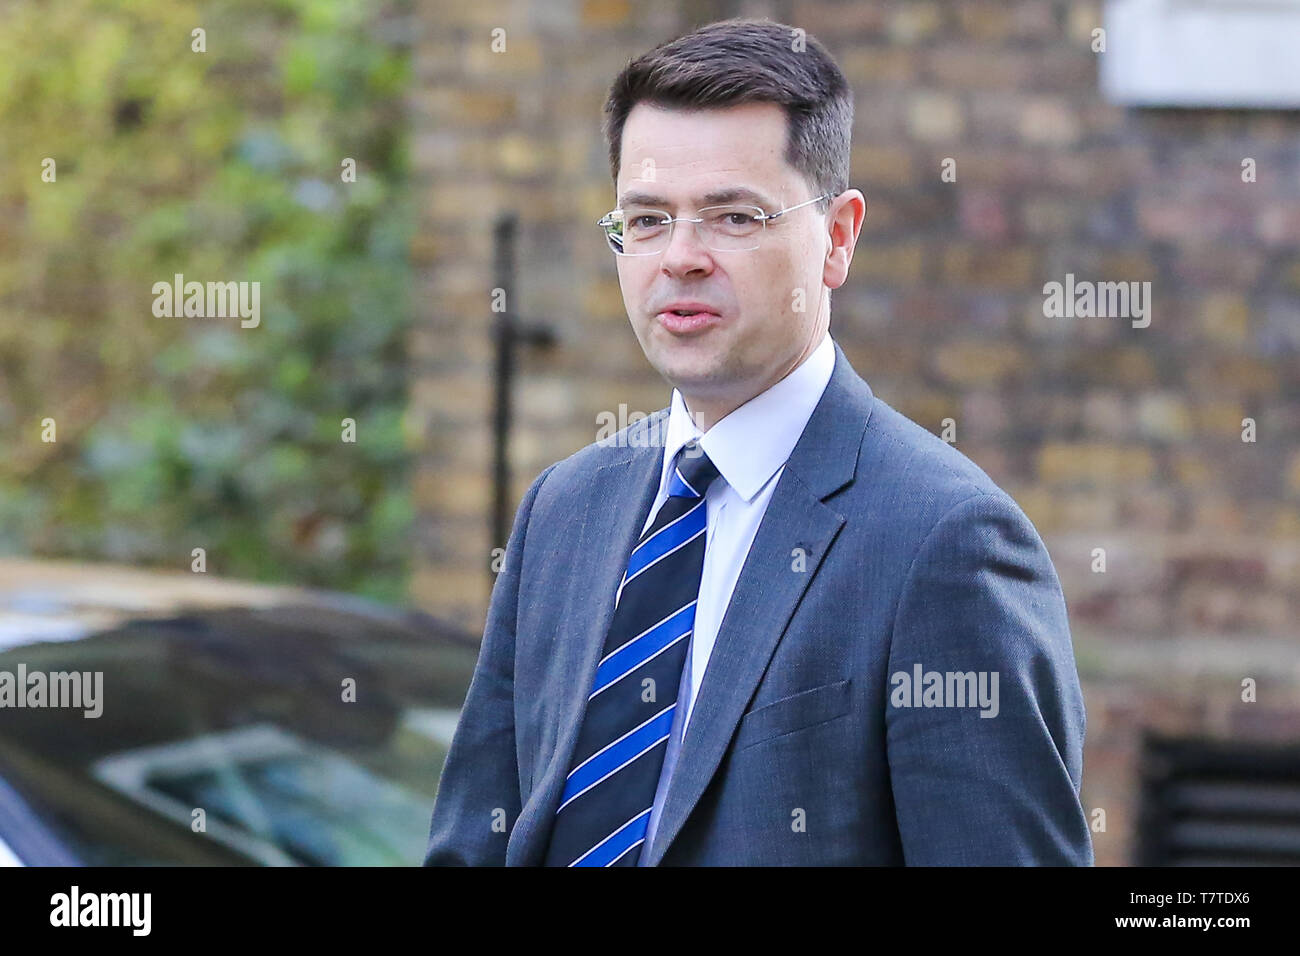 March 26, 2019 - London, UK, United Kingdom - Communities Secretary James Brokenshire seen in Downing Street..On 14 June 2017, a fire broke out in the 24-storey Grenfell Tower block of flats in North Kensington, West London where 72 people died, more than 70 others were injured and 223 people escaped..The UK Government is to fund an estimated Â£200 million to replacement of unsafe Grenfell style cladding on around 170 high-rise private residential buildings after private building owners failed to take action. Communities Secretary James Brokenshire said inaction from building owners had compel Stock Photo